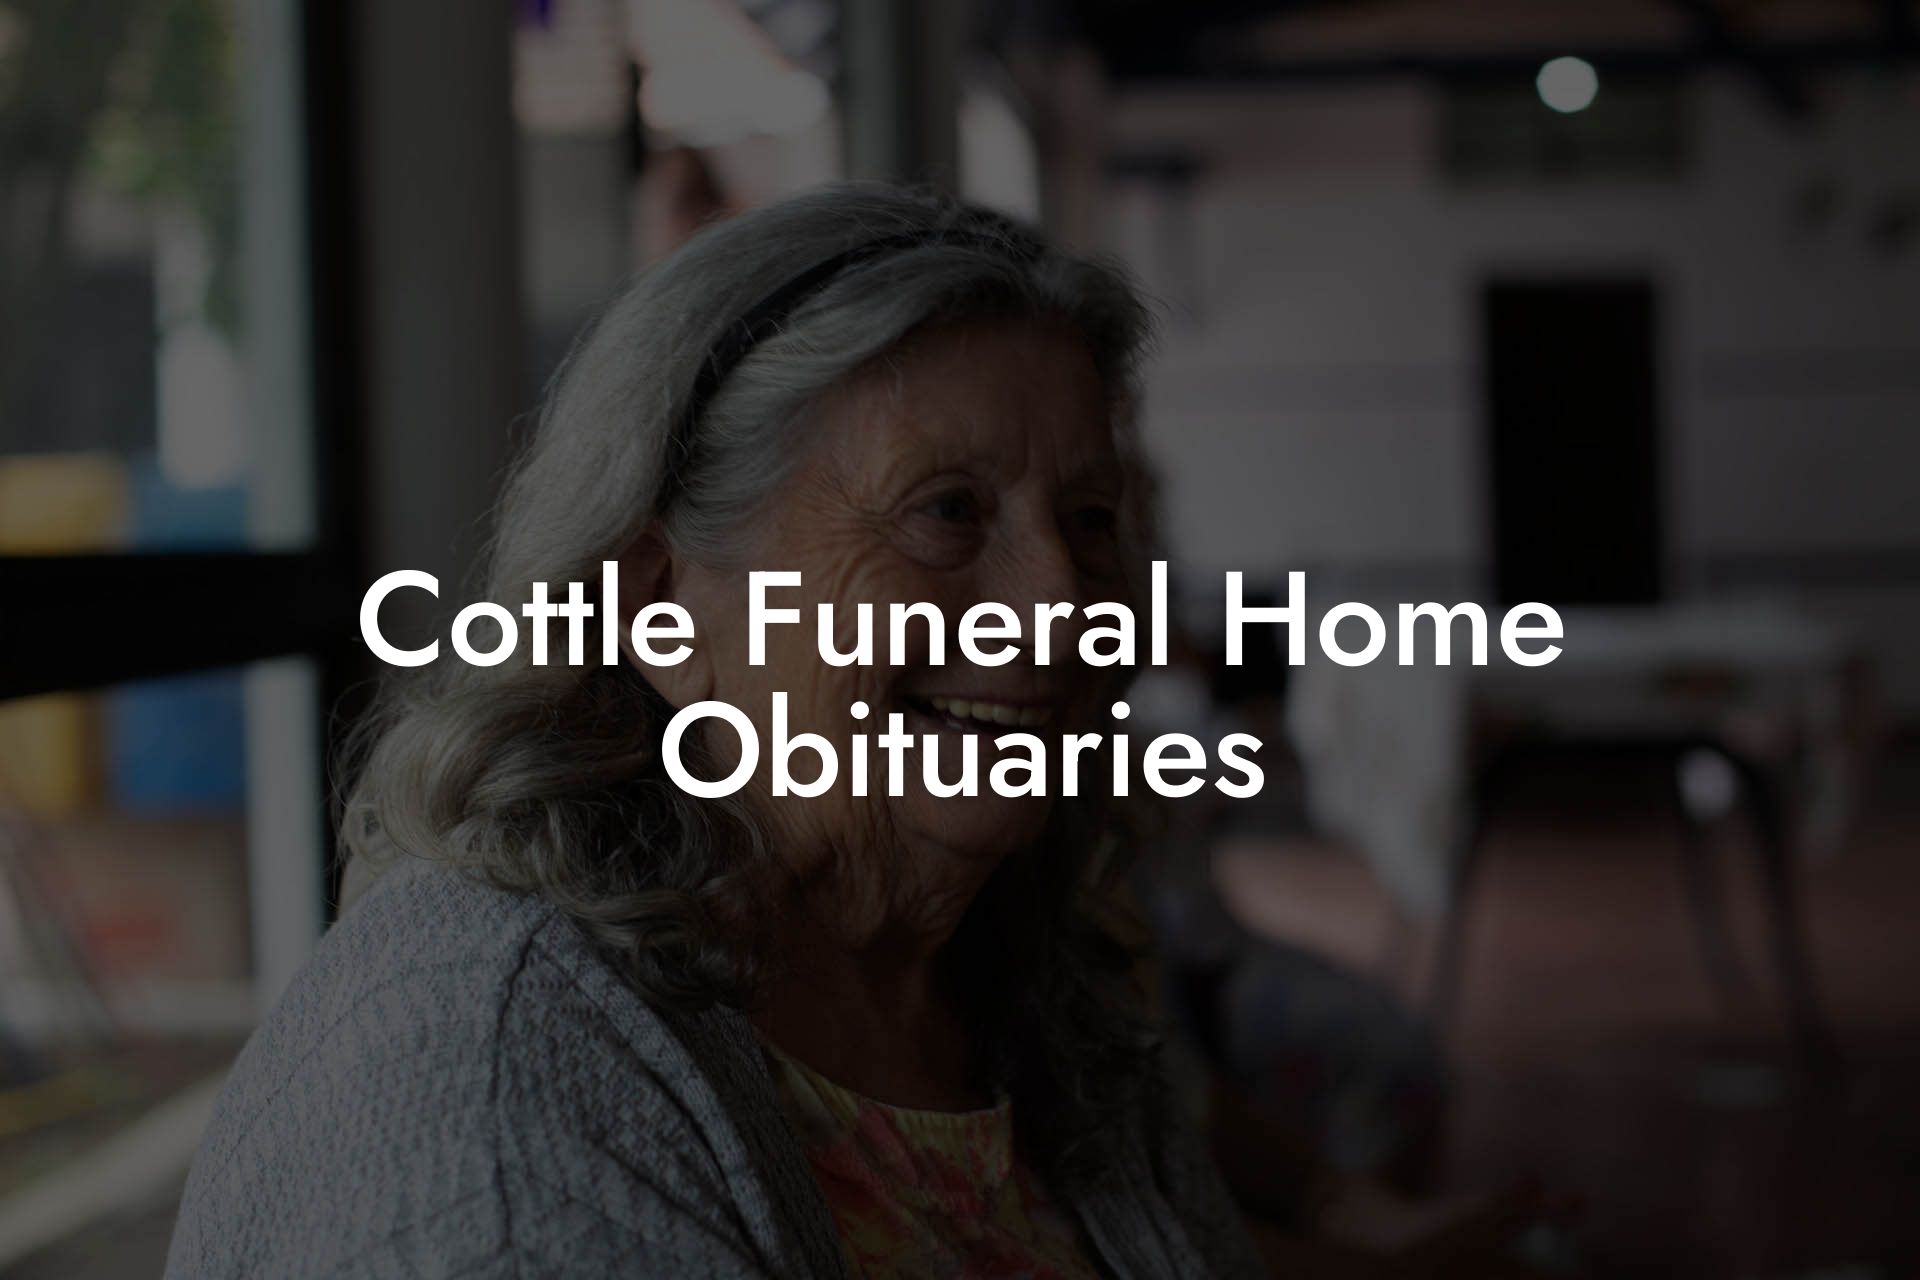 Cottle Funeral Home Obituaries